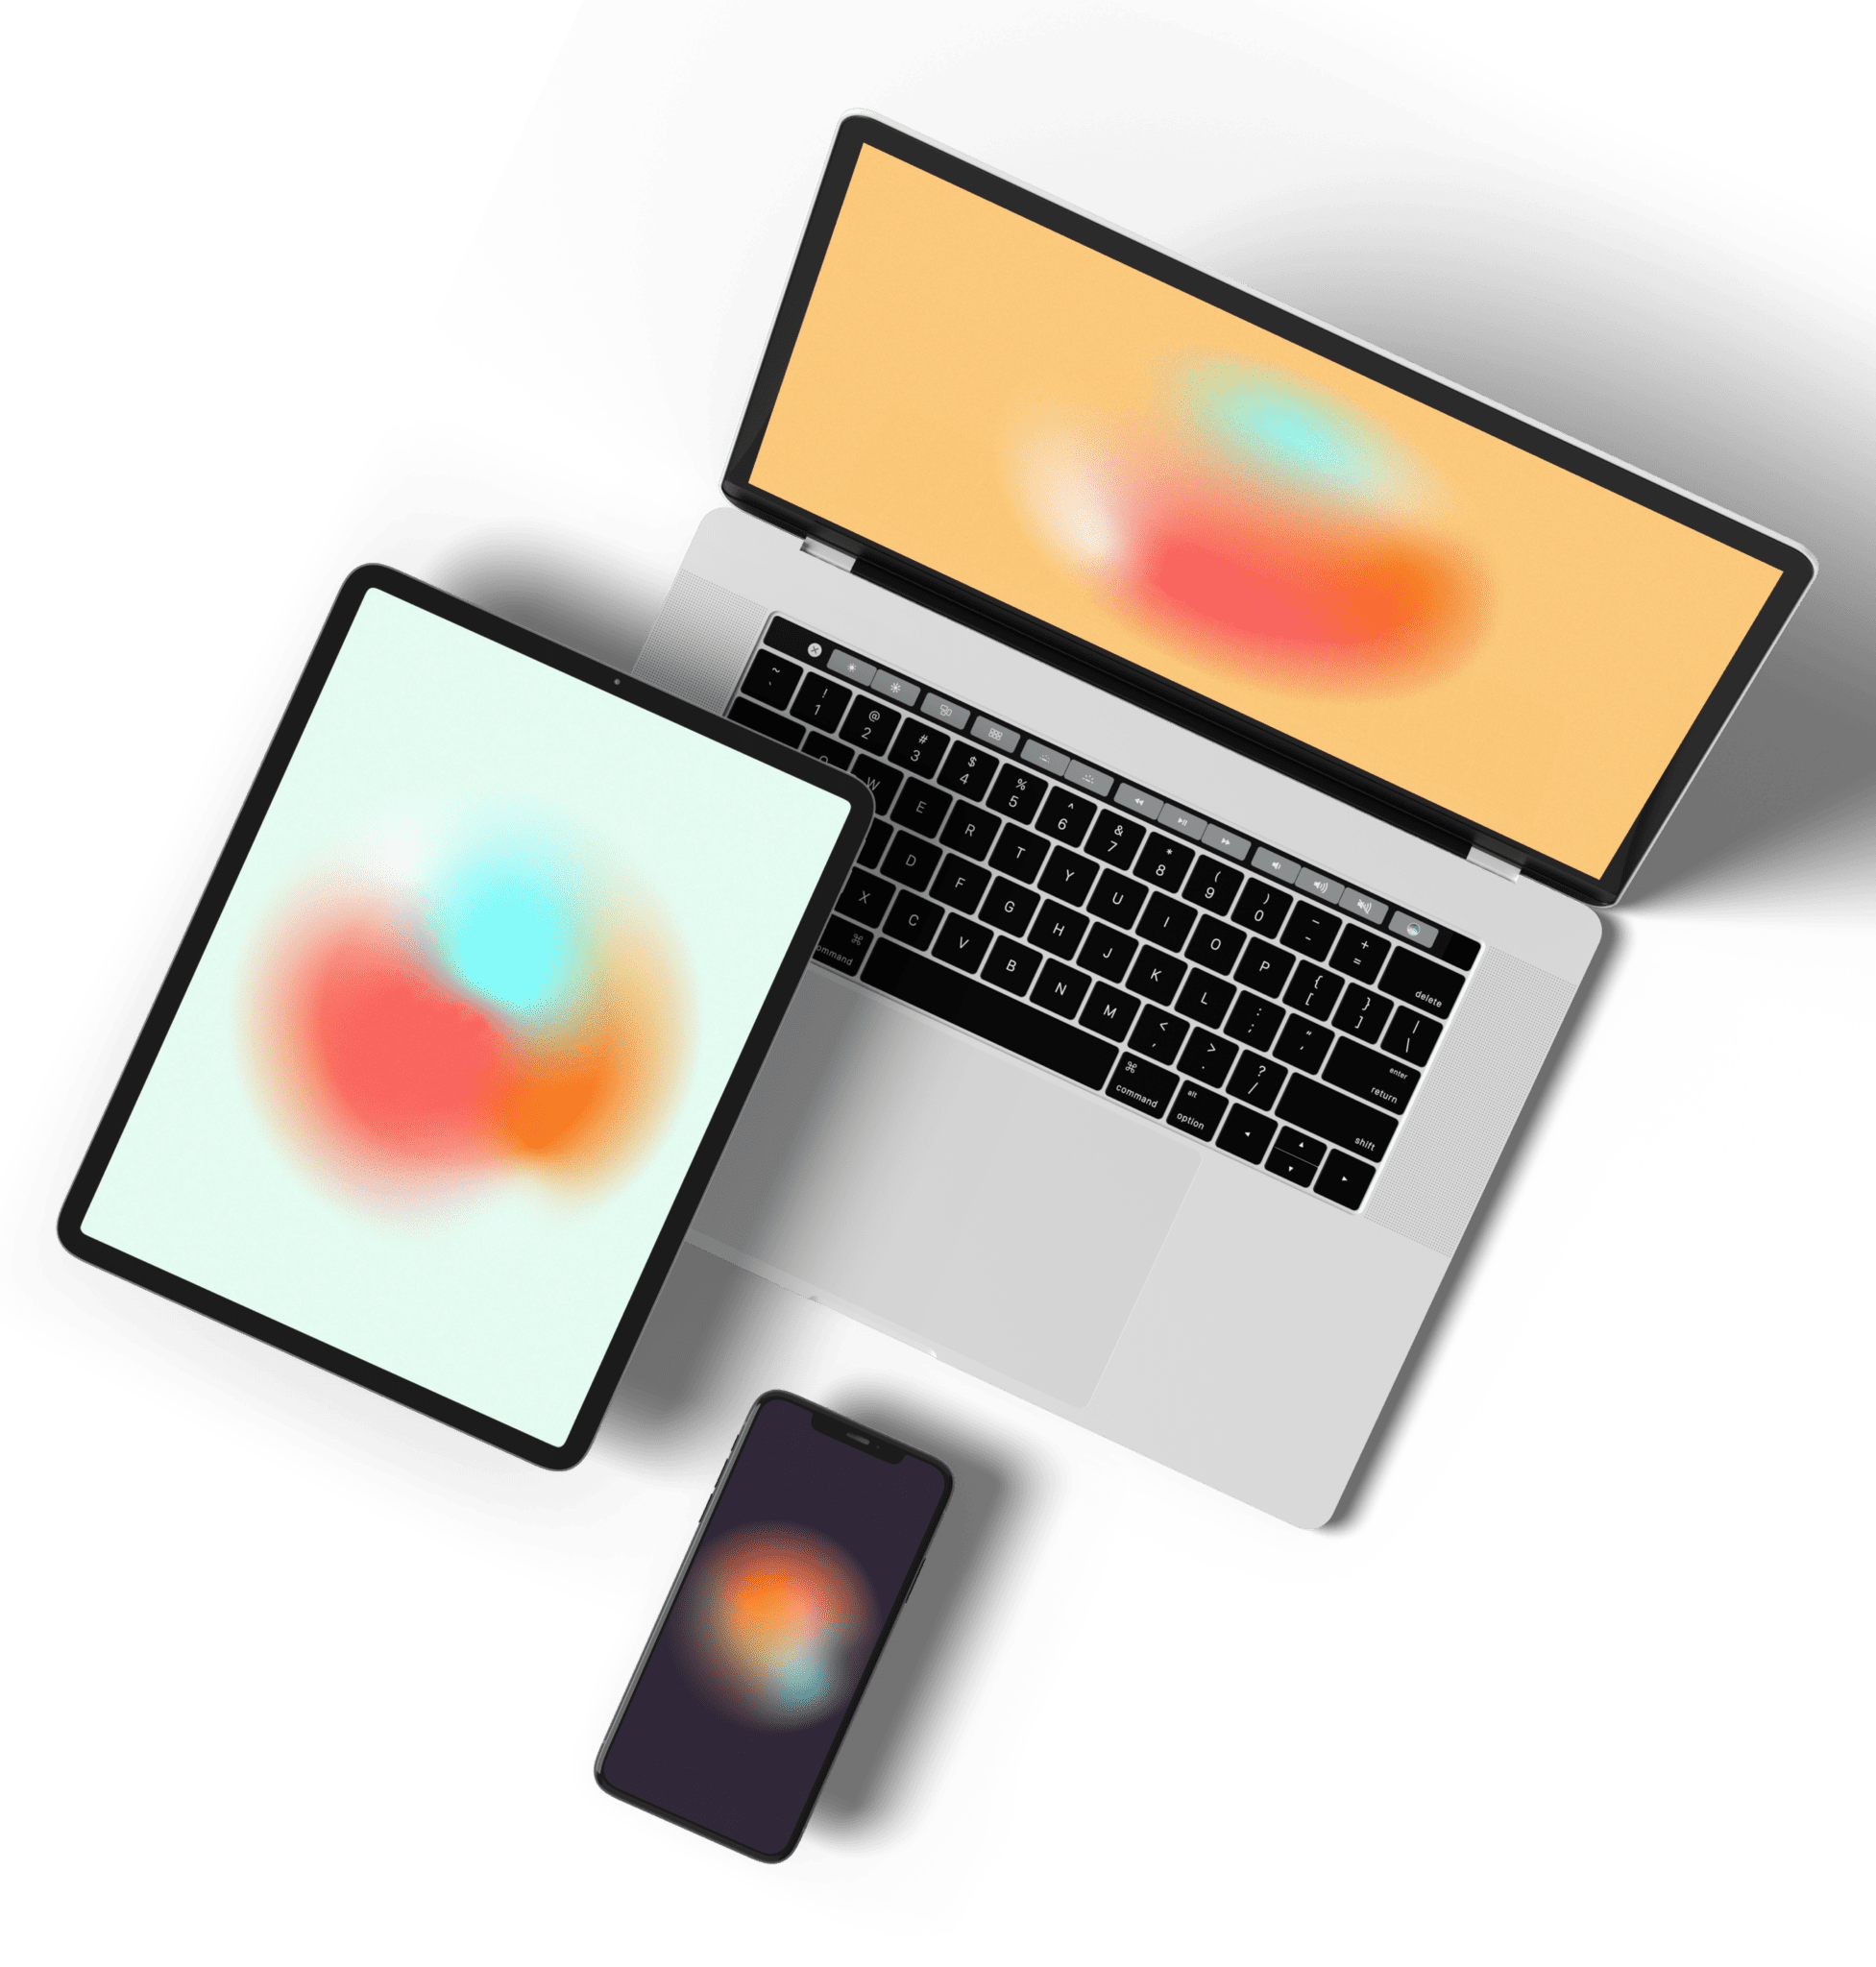 Mockup of gradient wallpapers displayed on a laptop, tablet and phone.